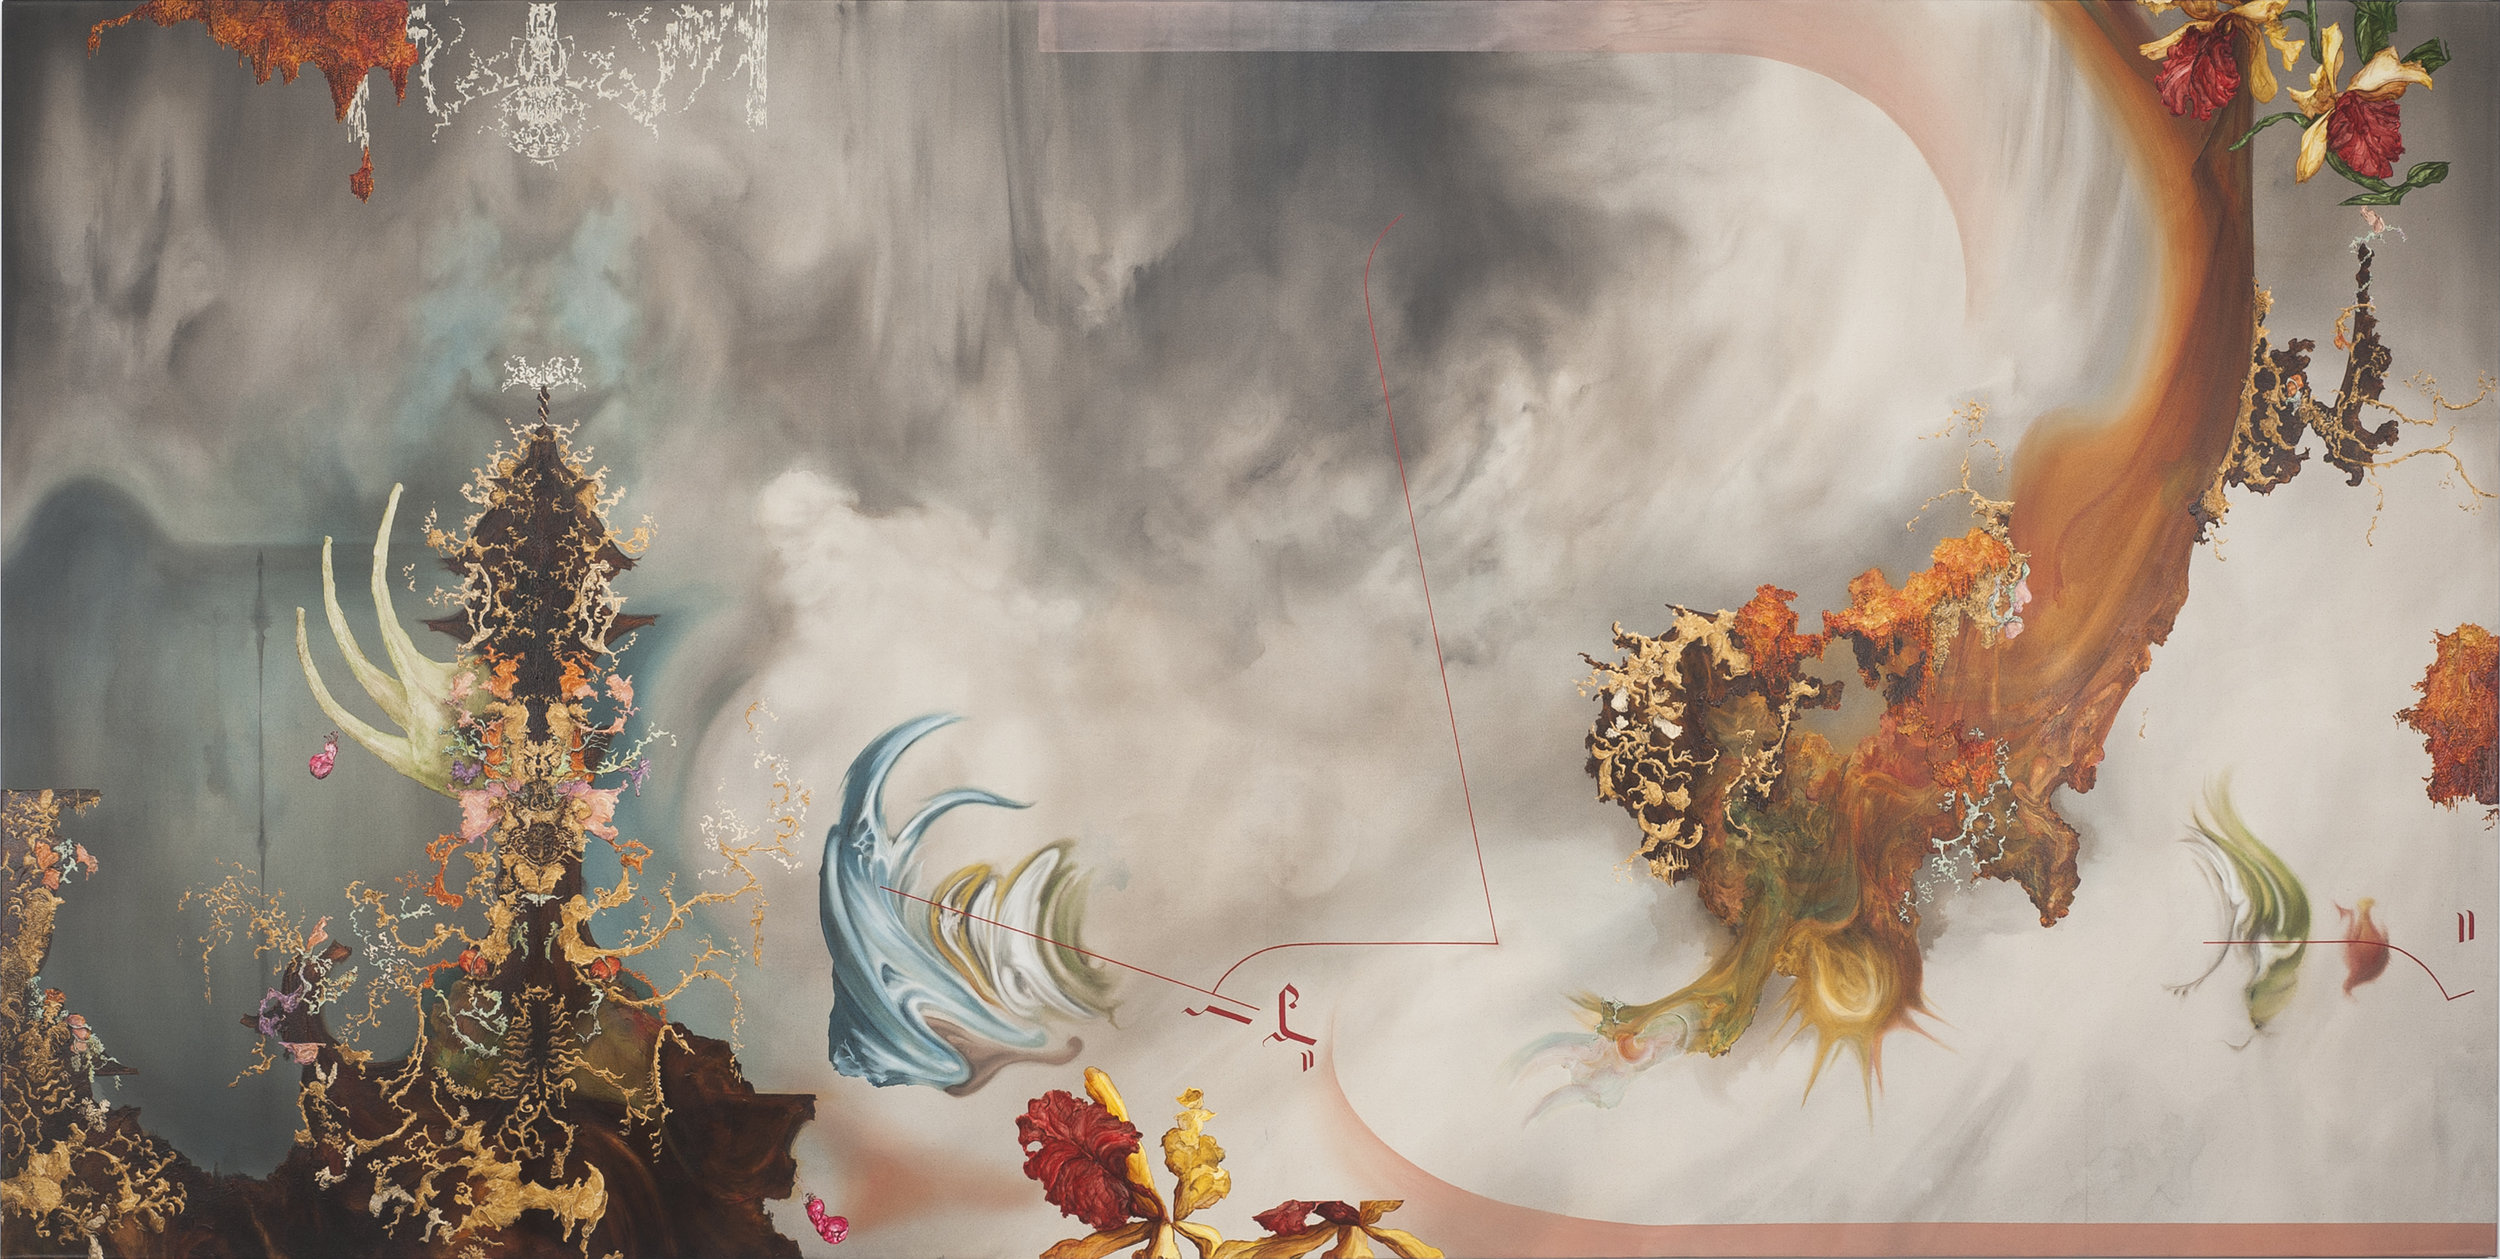  Eric Siemens,  A Settle in the Cornice Downs,  2018, Acrylic on canvas, 72 x 144 inches (182.9 x 365.8 cm) 